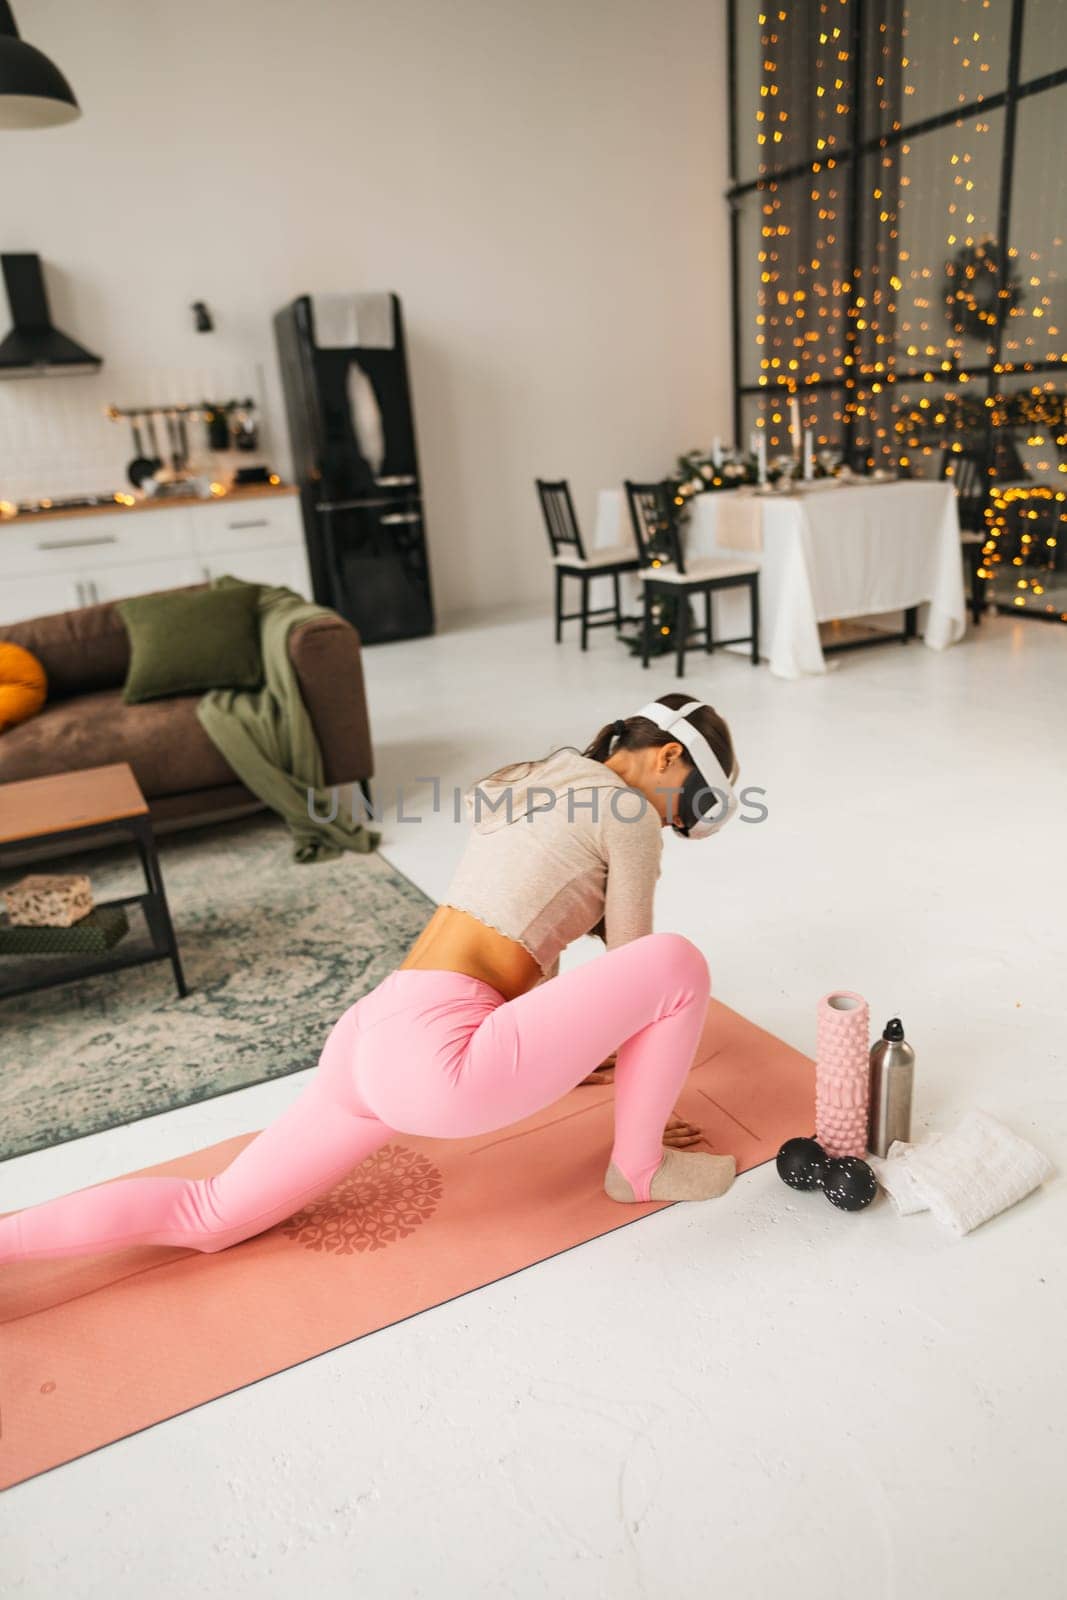 Stretching the arms as part of home fitness routines with a virtual reality headset during the festive Christmas season. by teksomolika